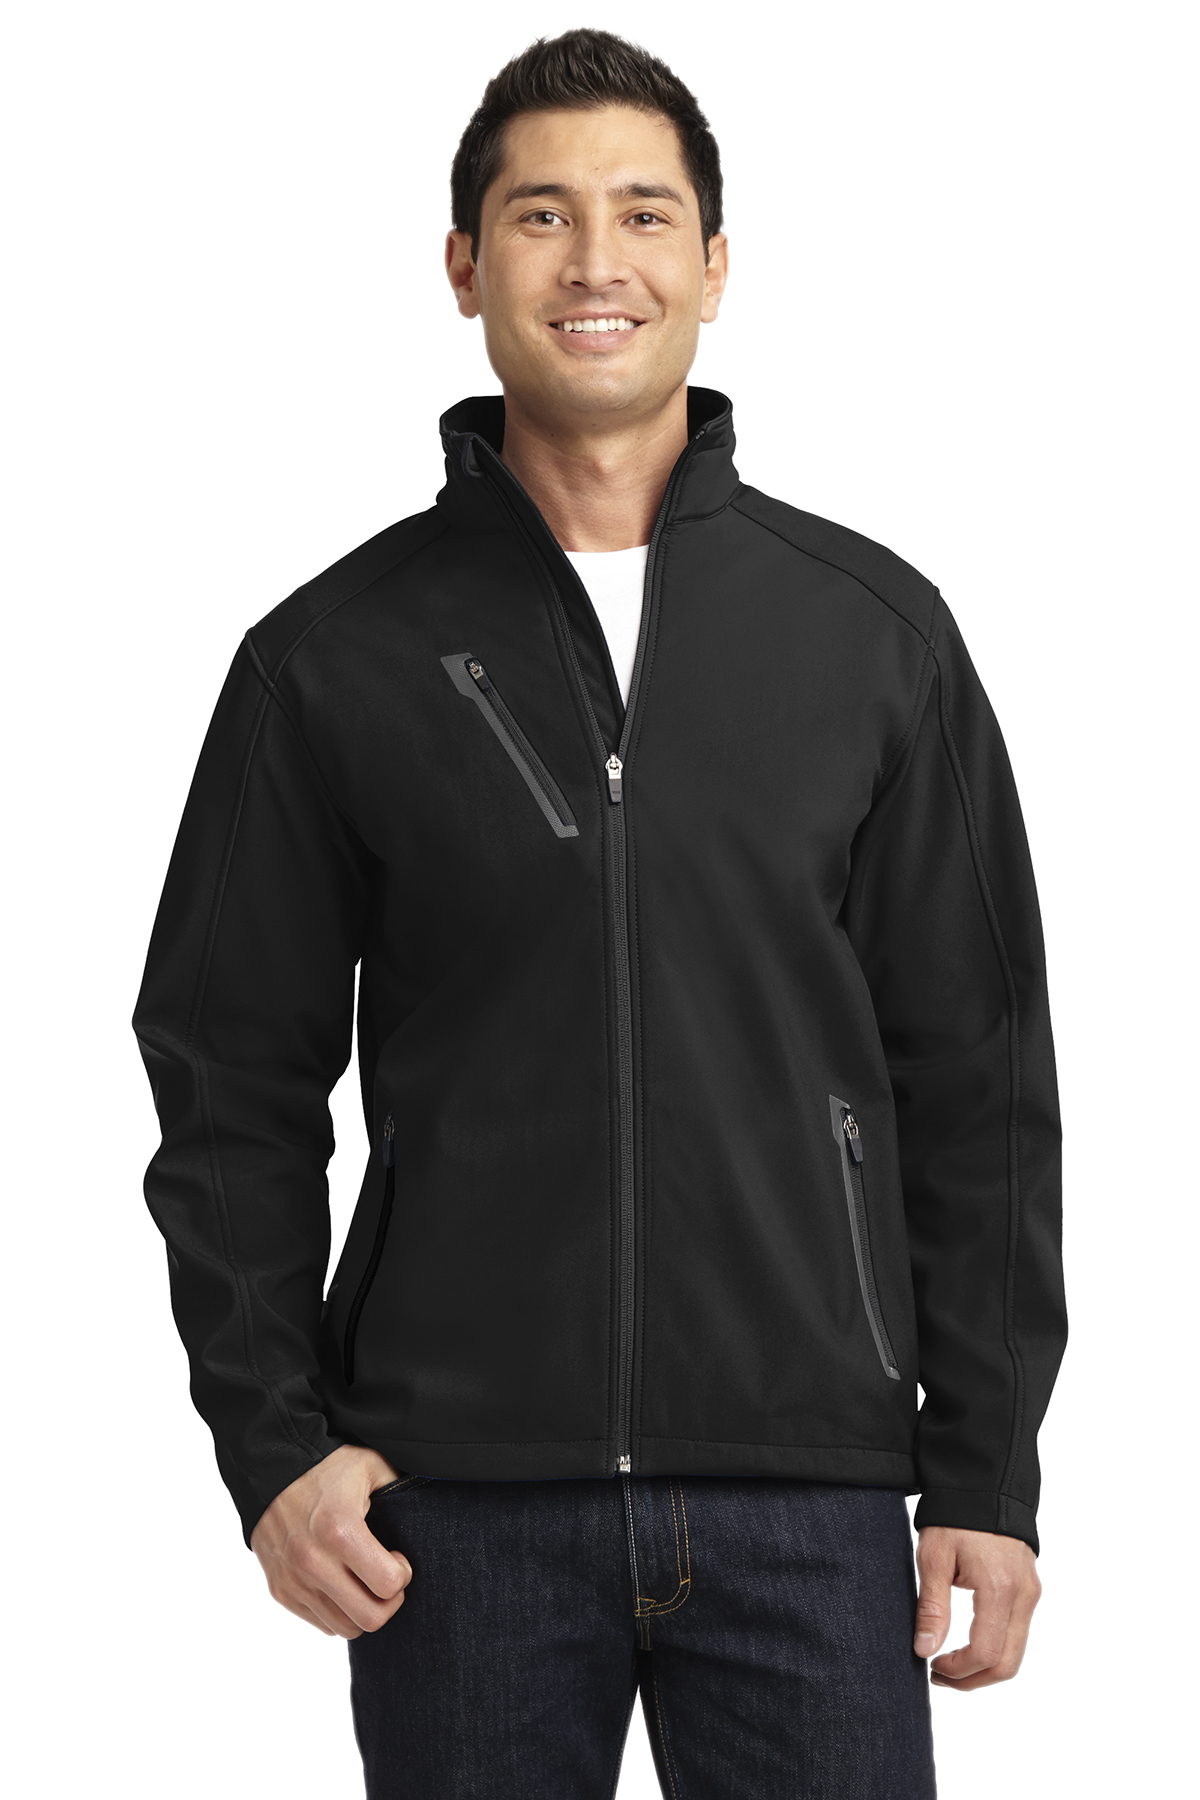 Port Authority J324 Welded Soft Shell Jacket - Outerwear